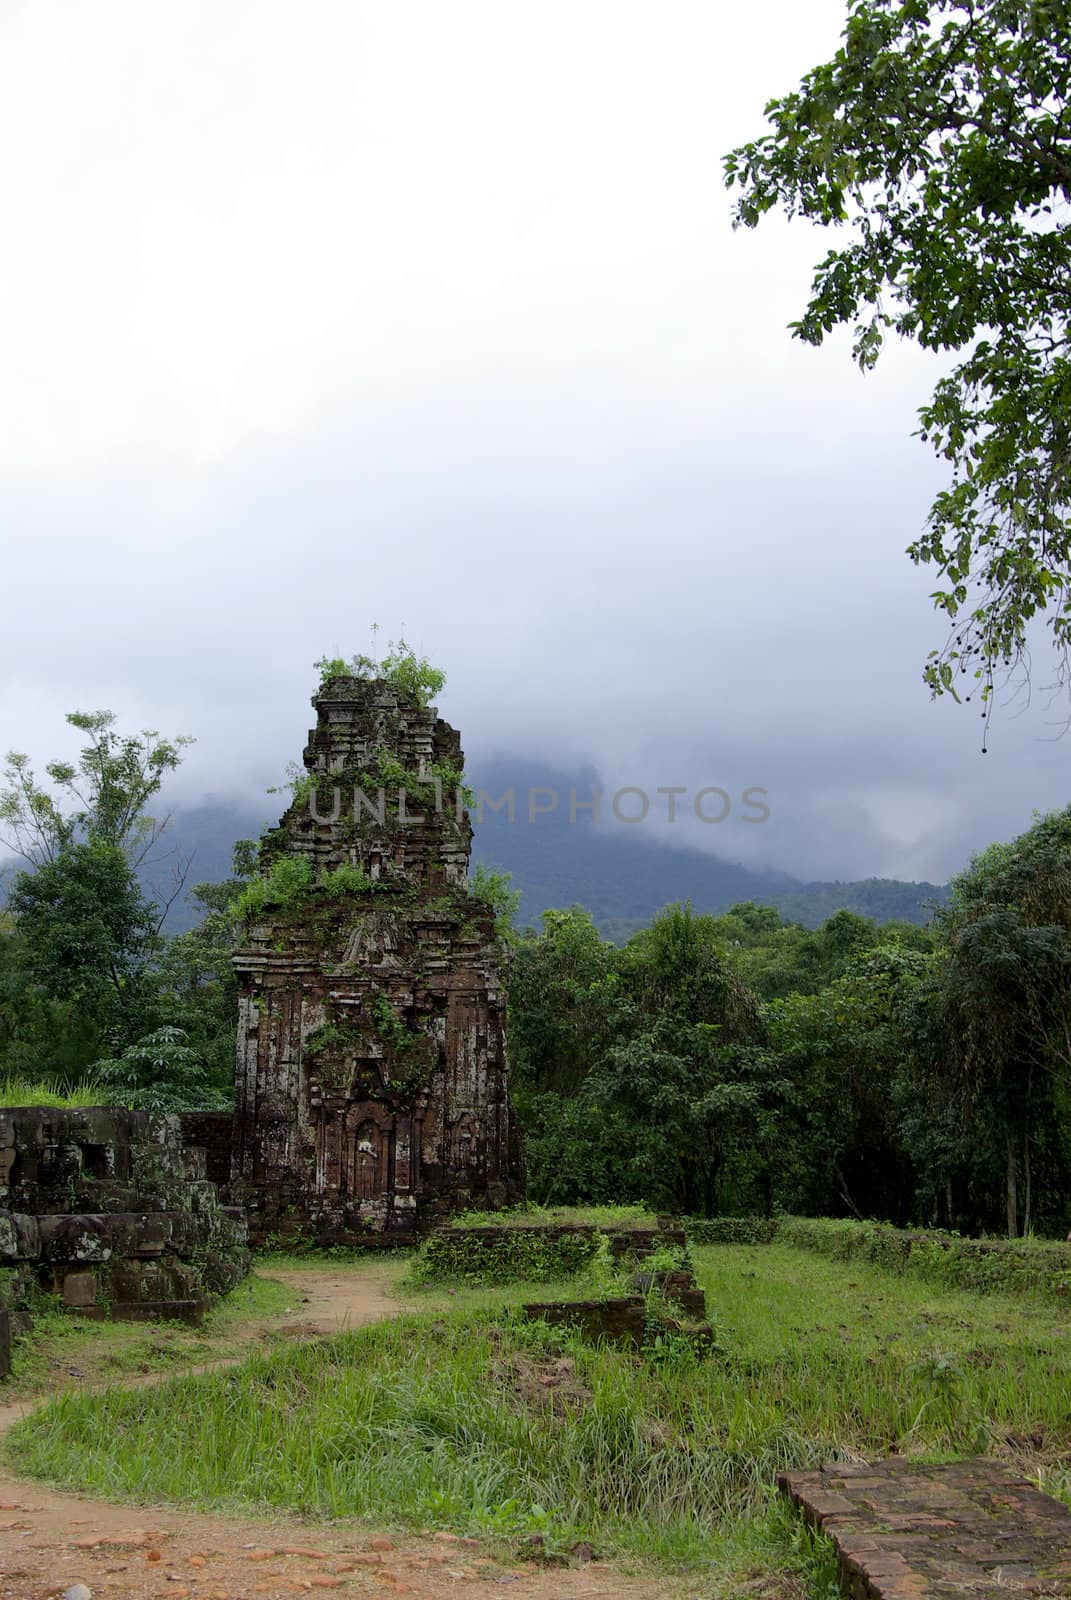 It's a part of "Cham" ruins in the middle of Vietnam, an old asian civilization